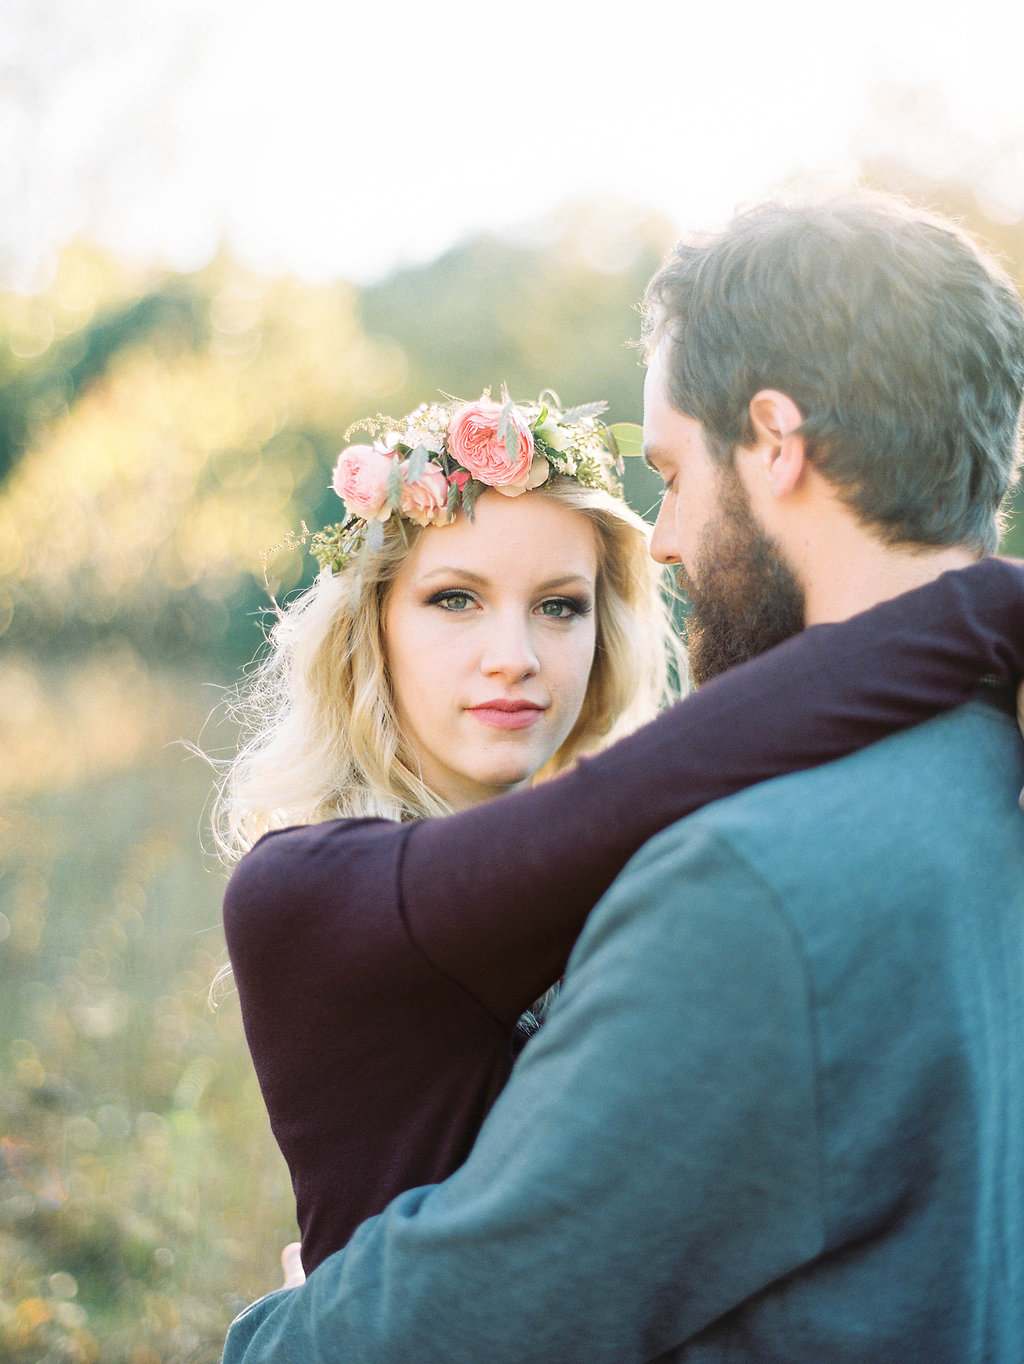 Flower Crown | Engagement Session | Ashley Slater Photography | The Day's Design